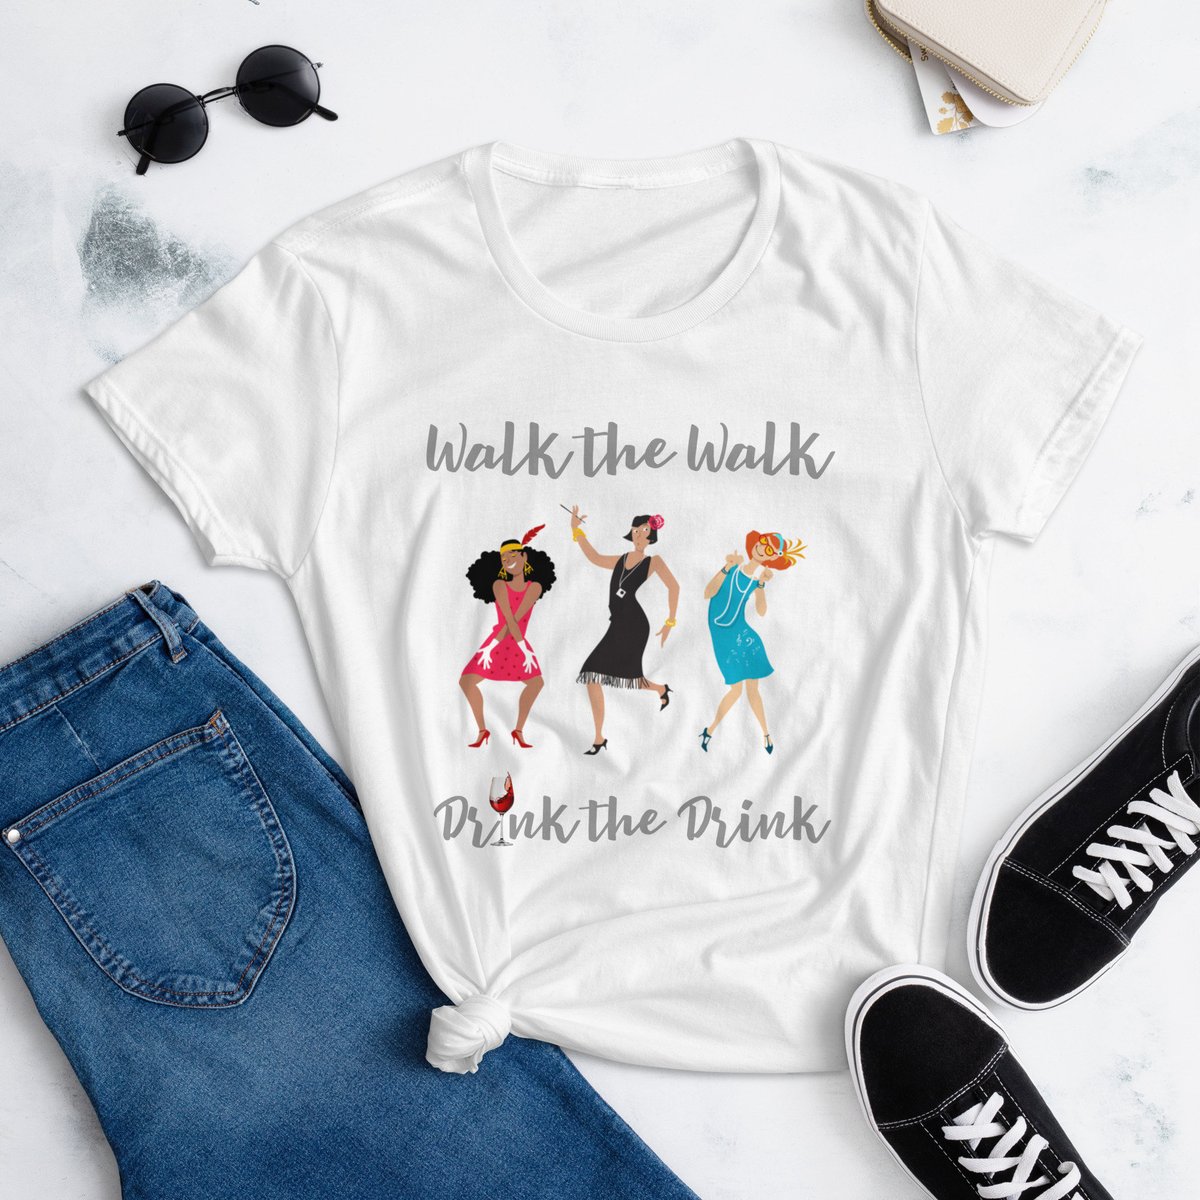 A fun shirt to wear on night out with girlfriends.  Great gift for friends, a bachelorettes or any lady that likes to get out.  Excited to share the latest addition to my #etsy shop: #ladiesnight #girlfriendgift #momsgonewild